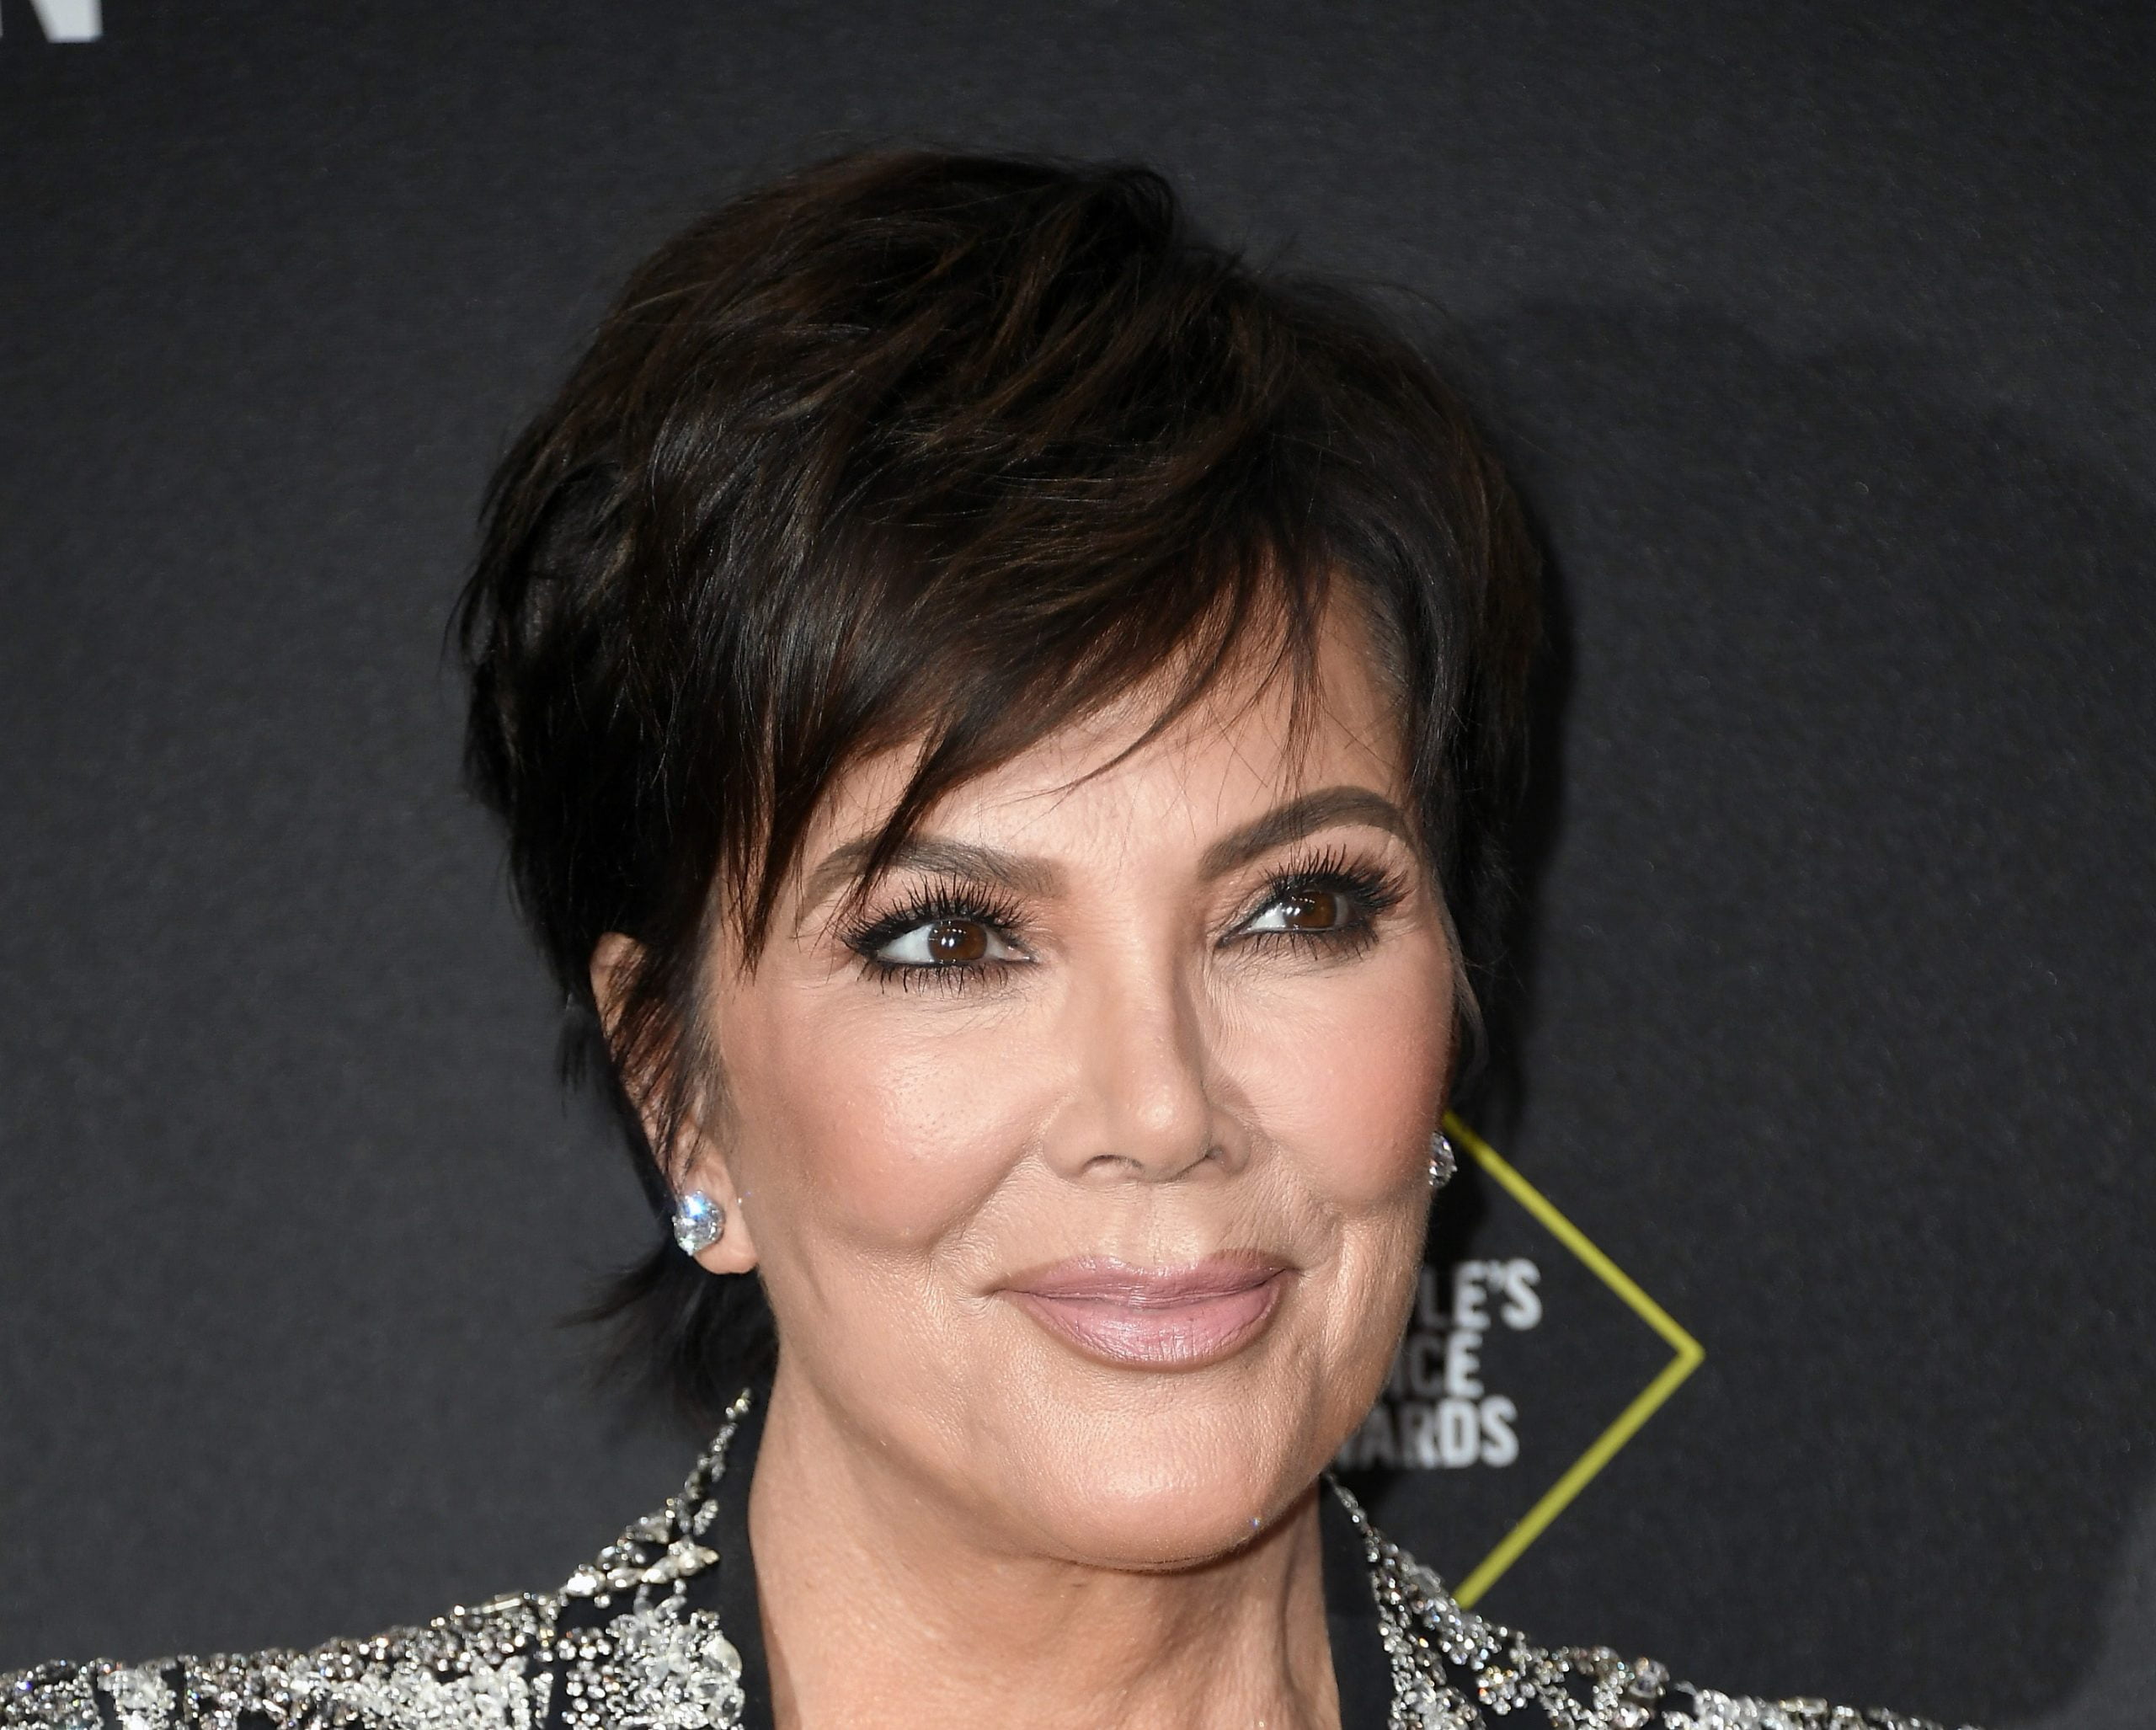 Kris Jenner Reportedly Files Patent & Trademark Application To Launch Her Own Beauty Brand